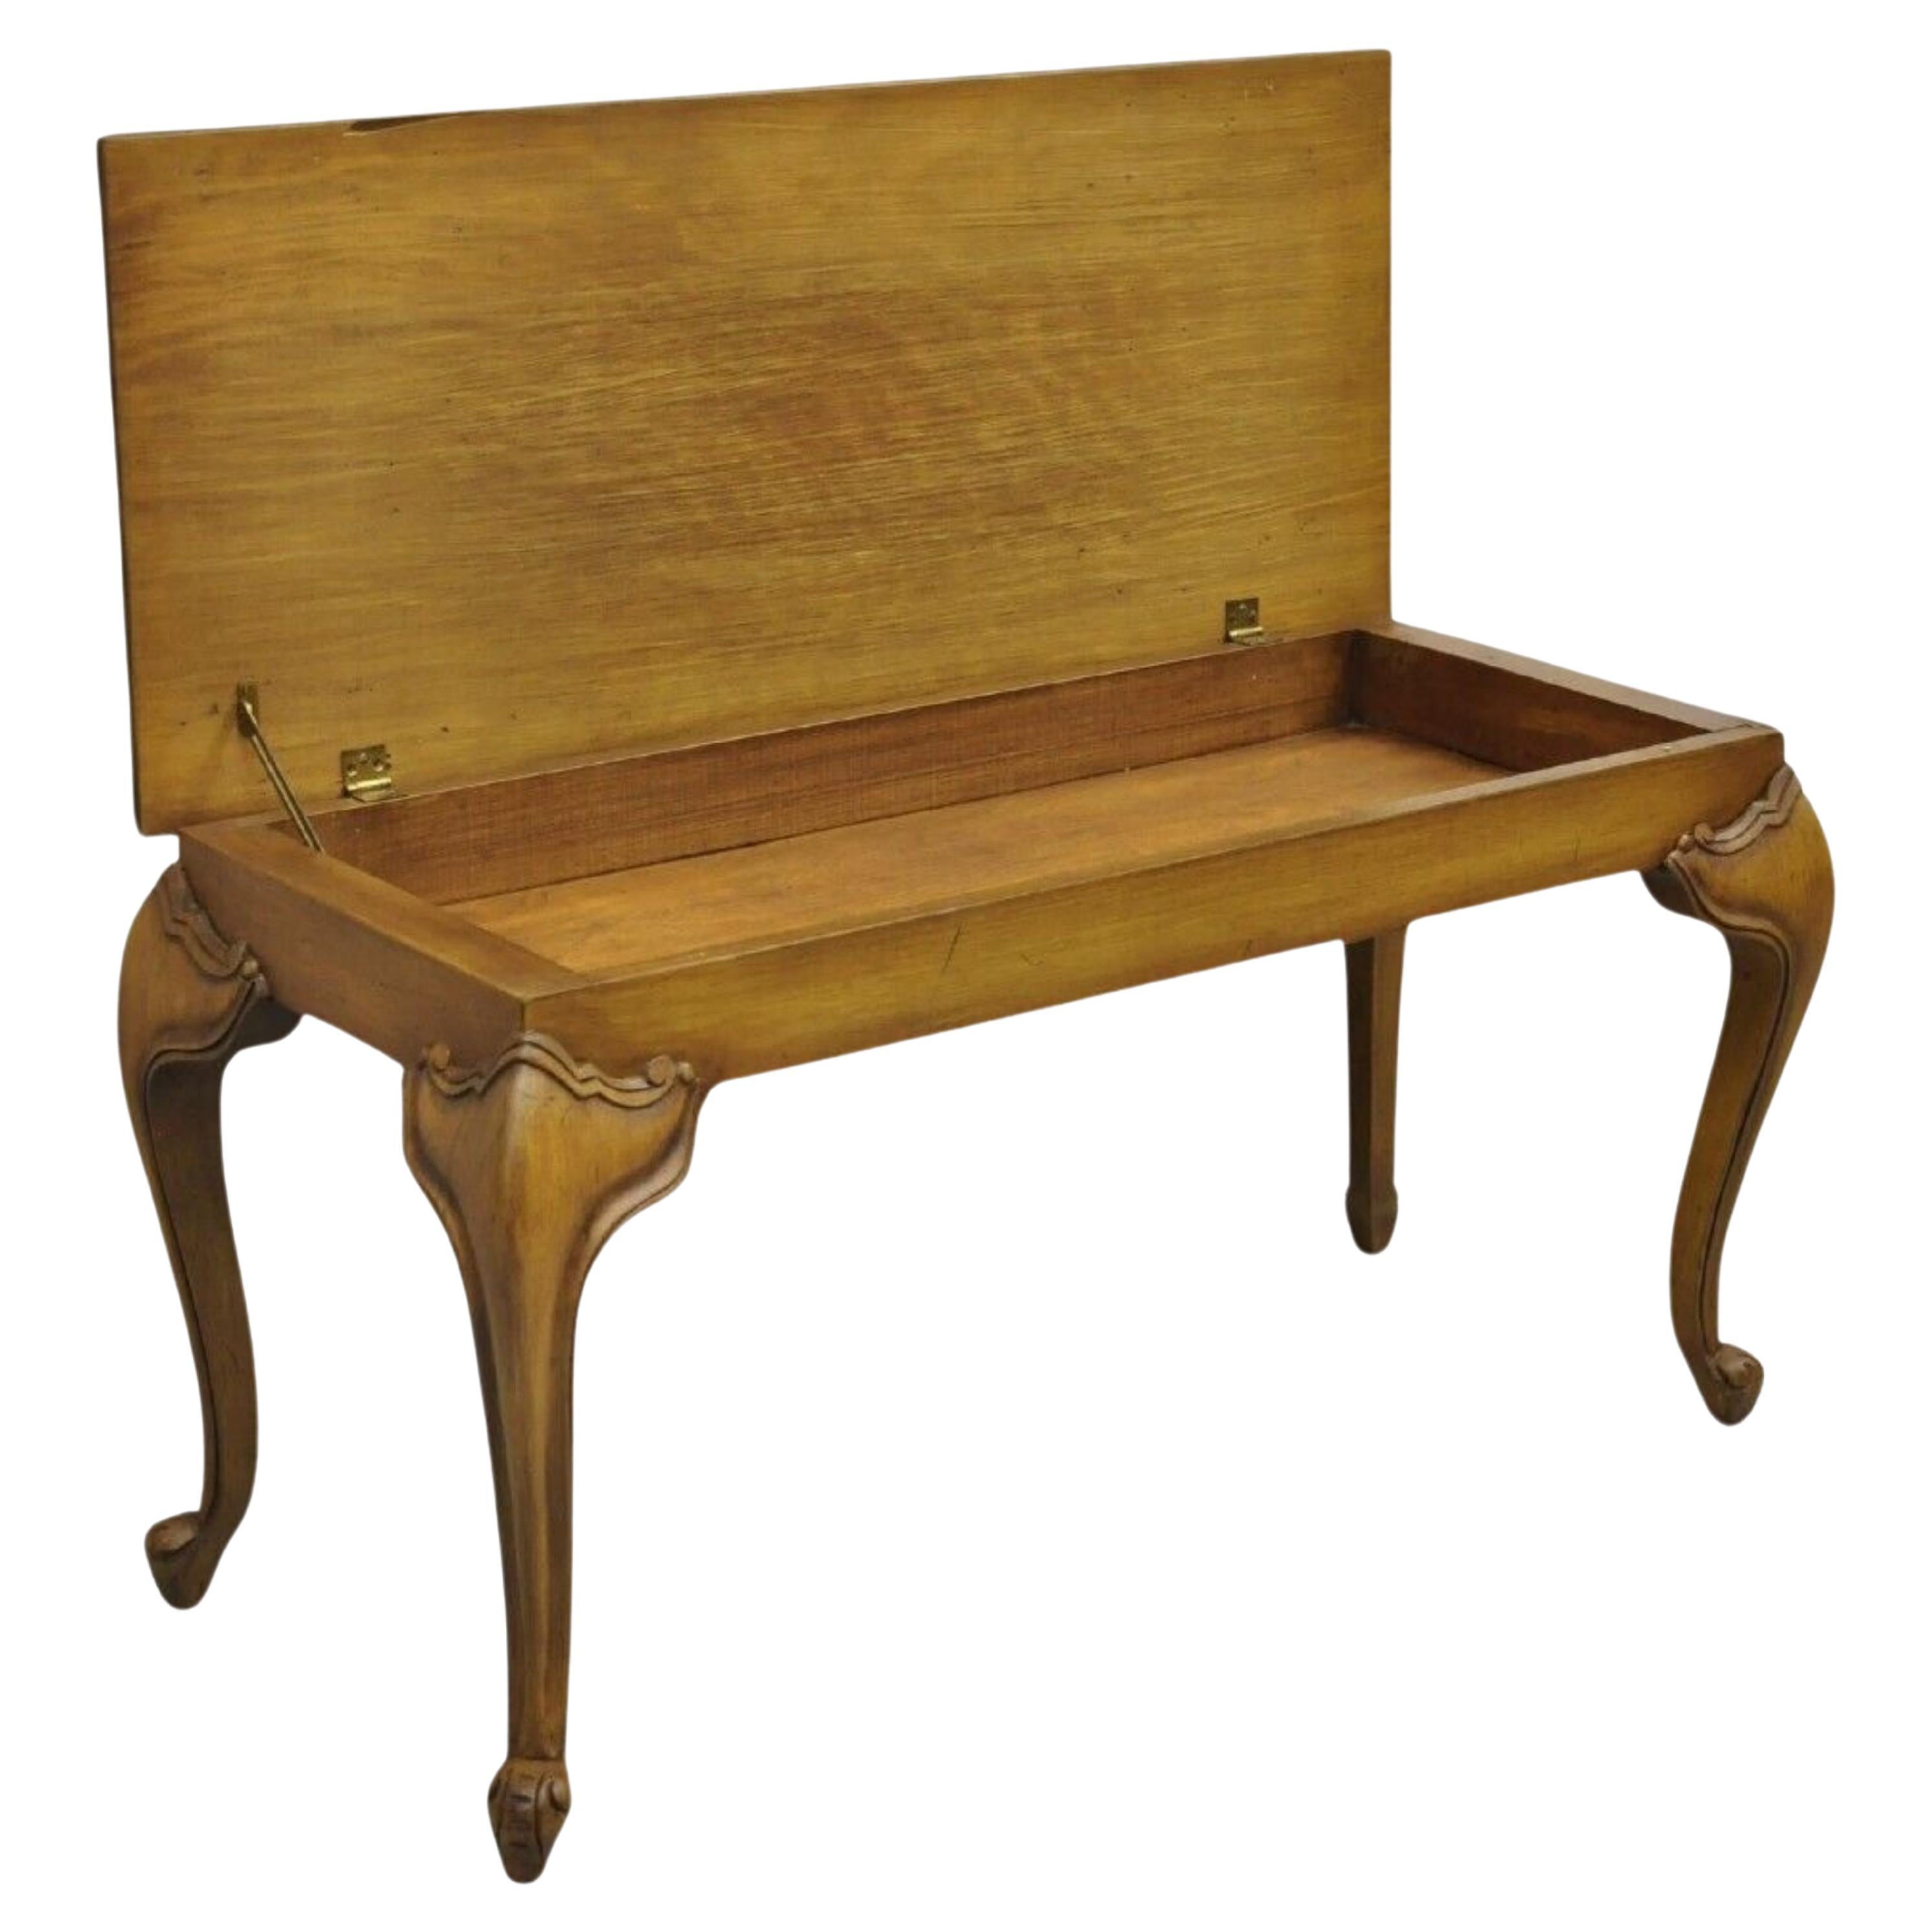 Vintage French Country Provincial Mahogany Wood Lift Top Storage Piano Bench For Sale